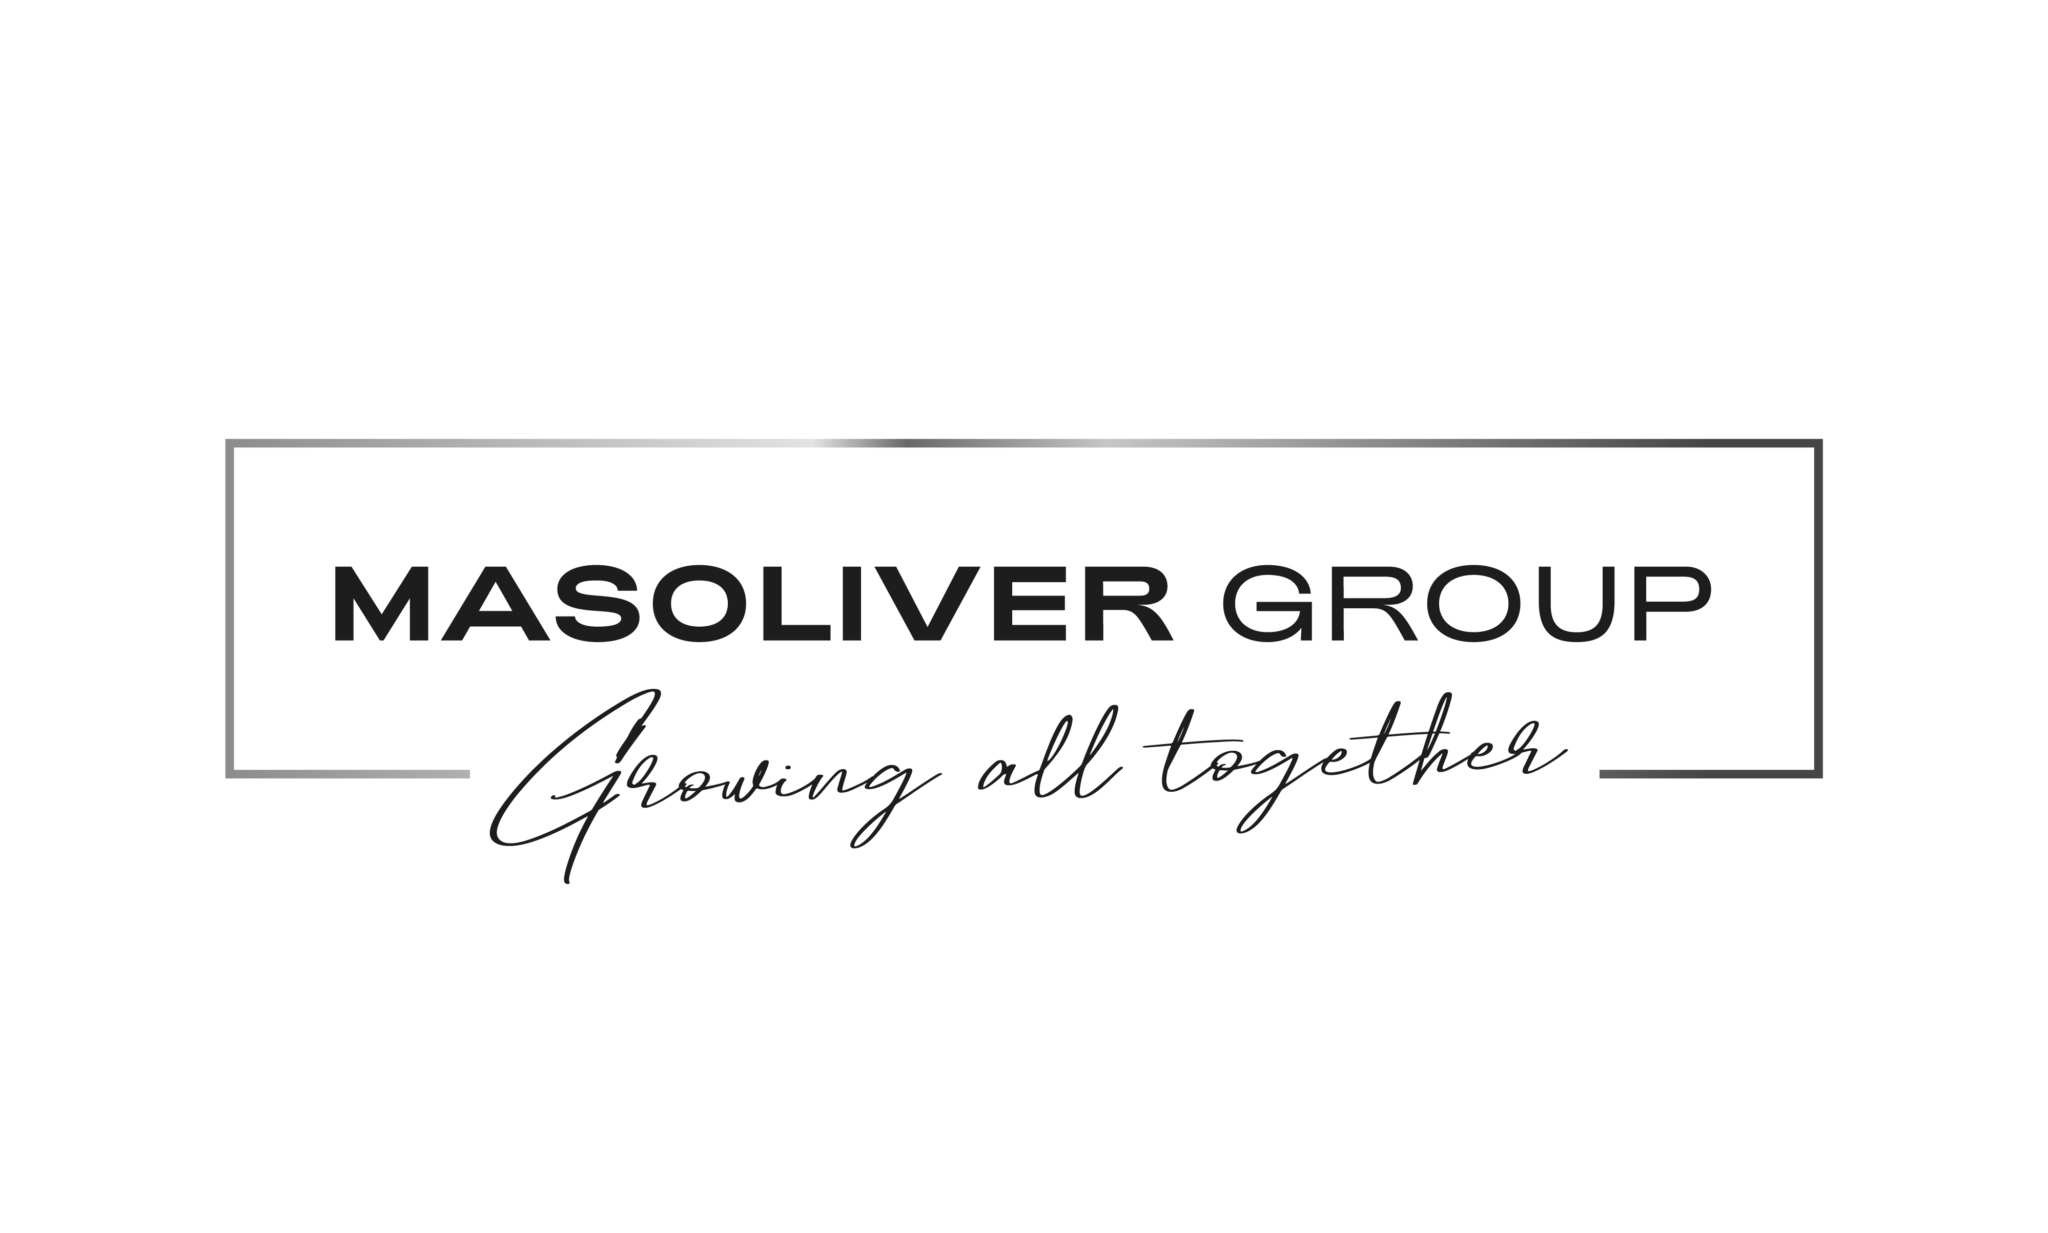 The new Masoliver Group image